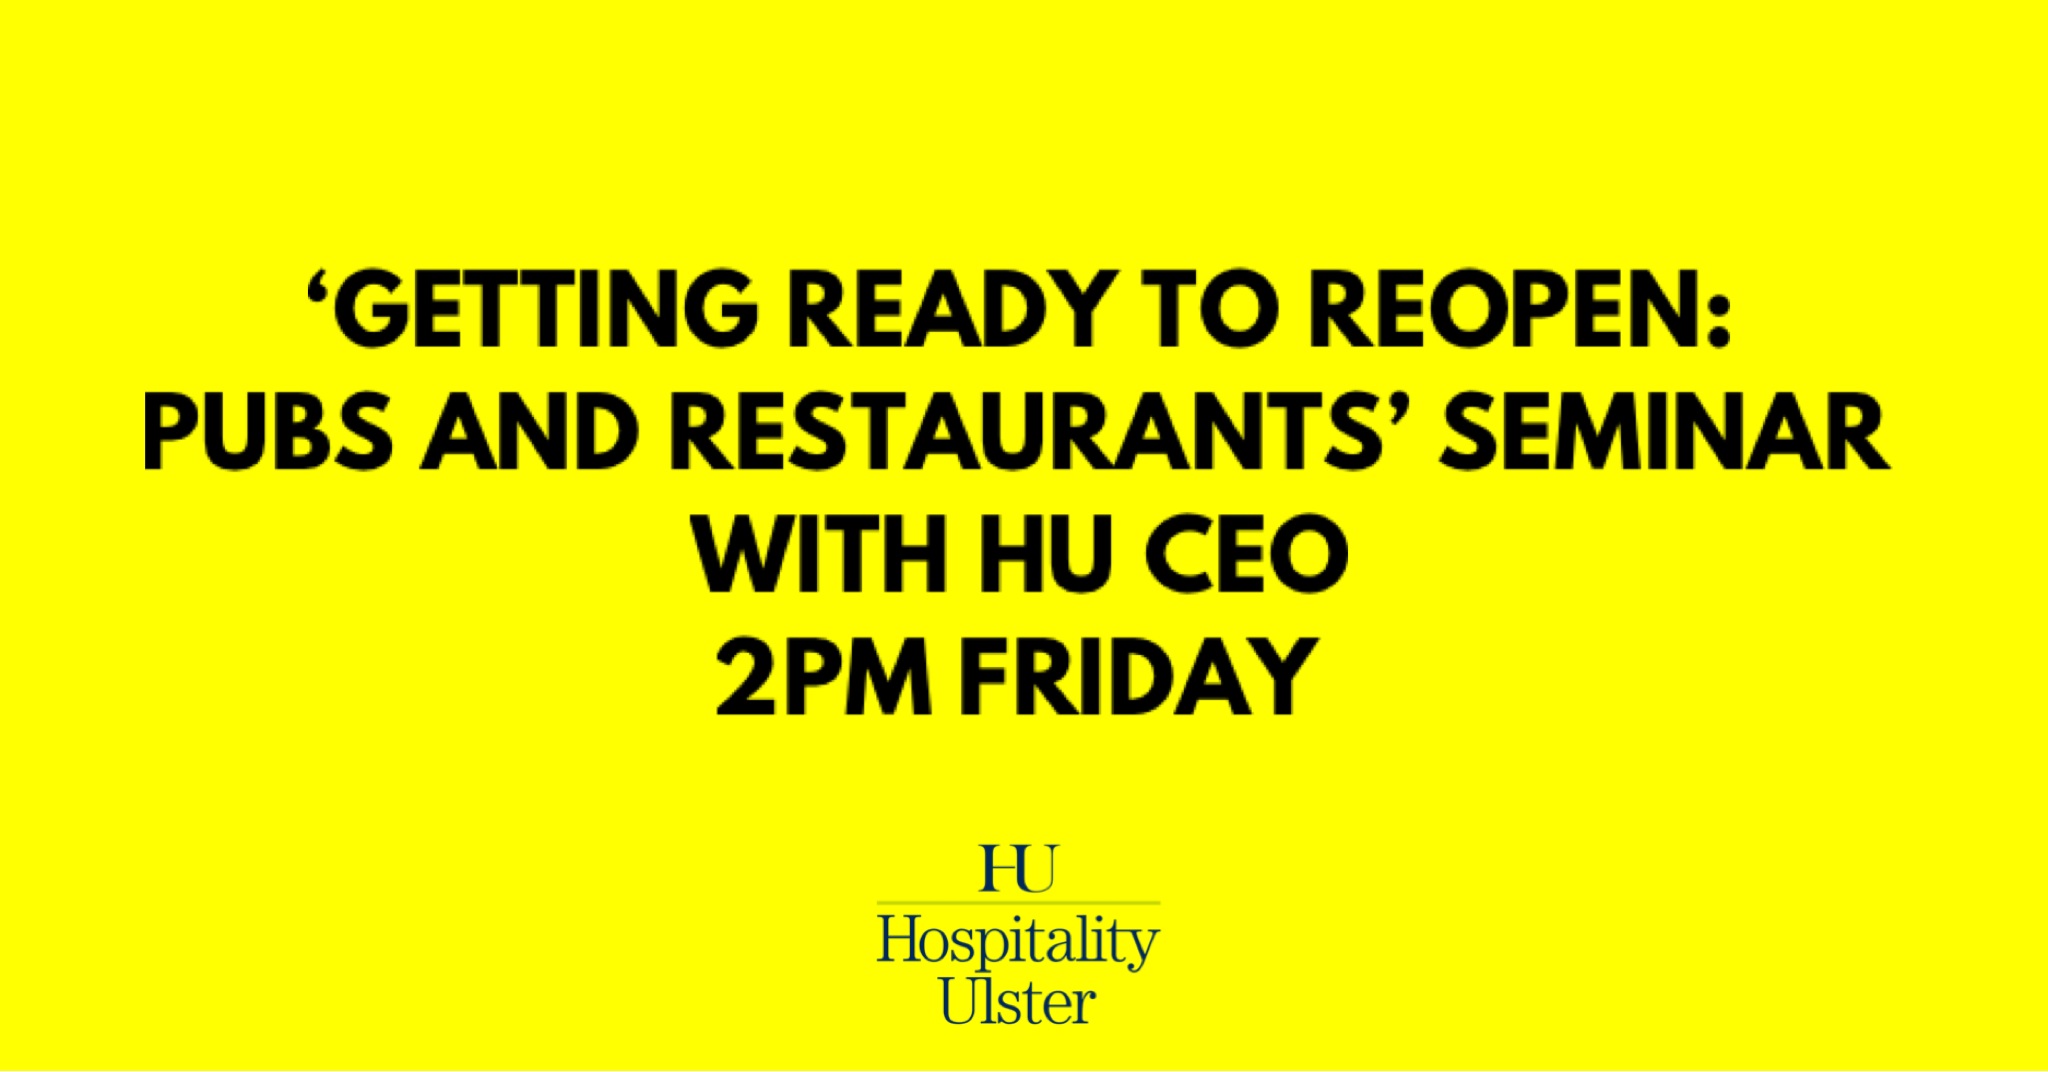 GETTING READY TO REOPEN PUBS AND RESTAURANTS SEMINAR WITH HU CEO 2PM FRIDAY